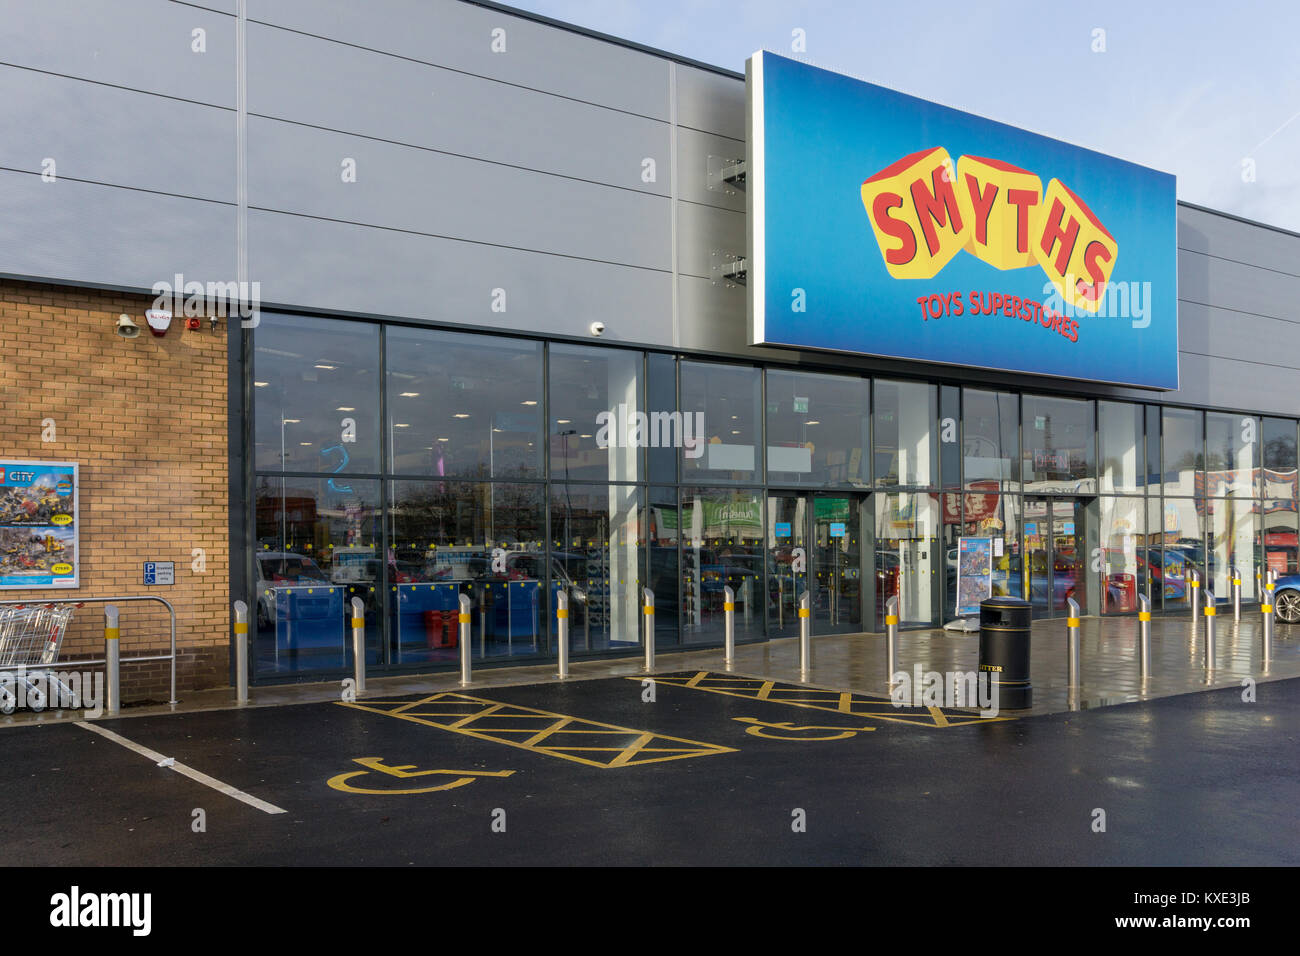 Shop front of Smyths Toys Superstores, part of a chain of toy retailers, Nene Valley Retail Park, Northampton, UK Stock Photo